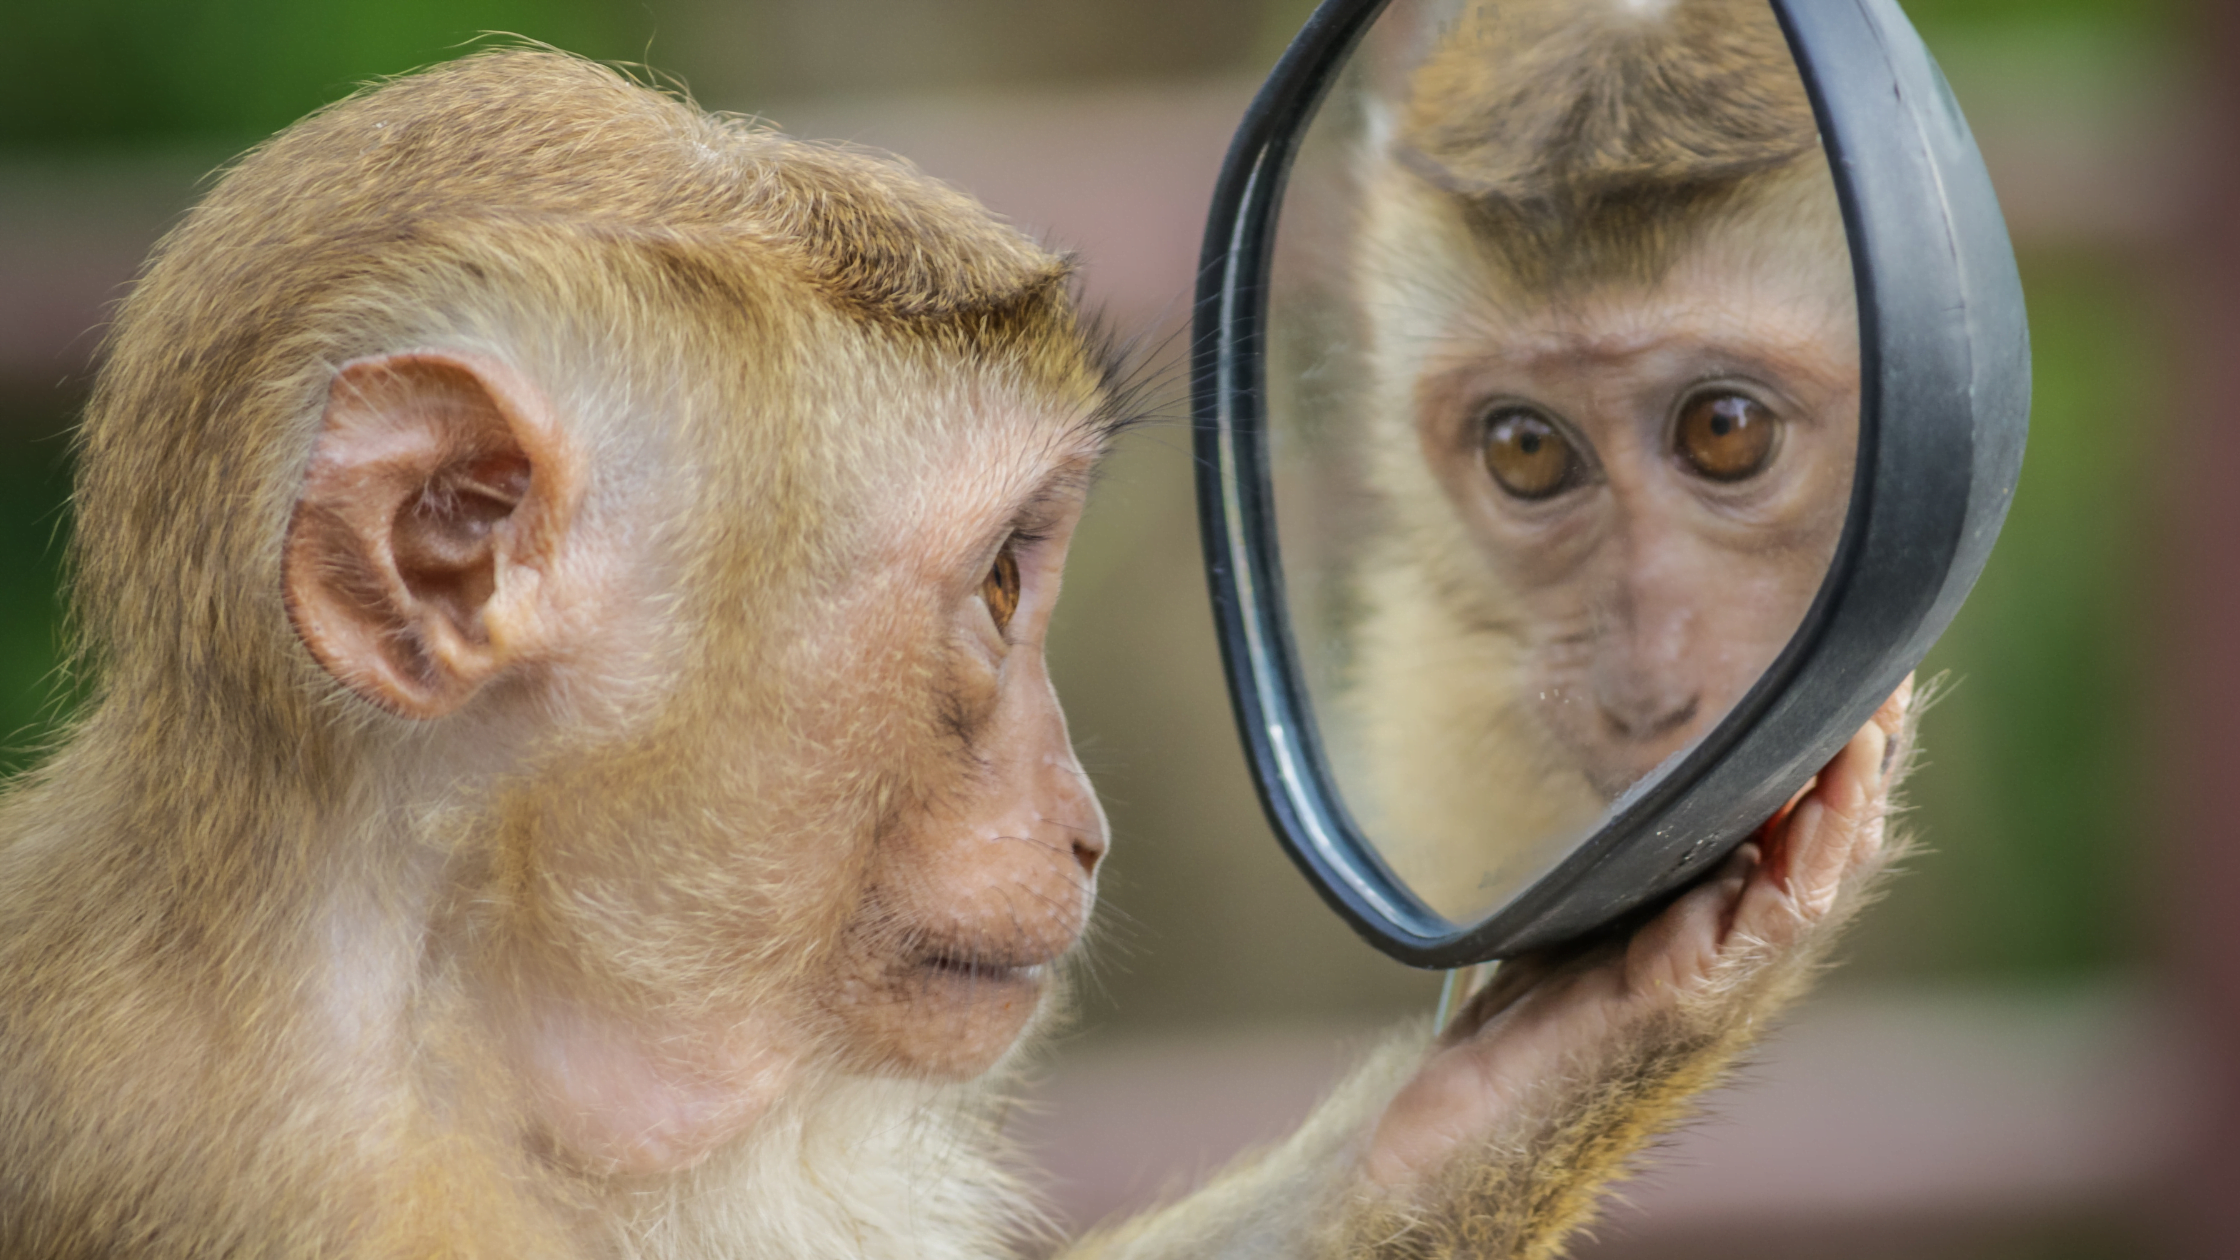 gibbon monkey looking into mirror at own reflection